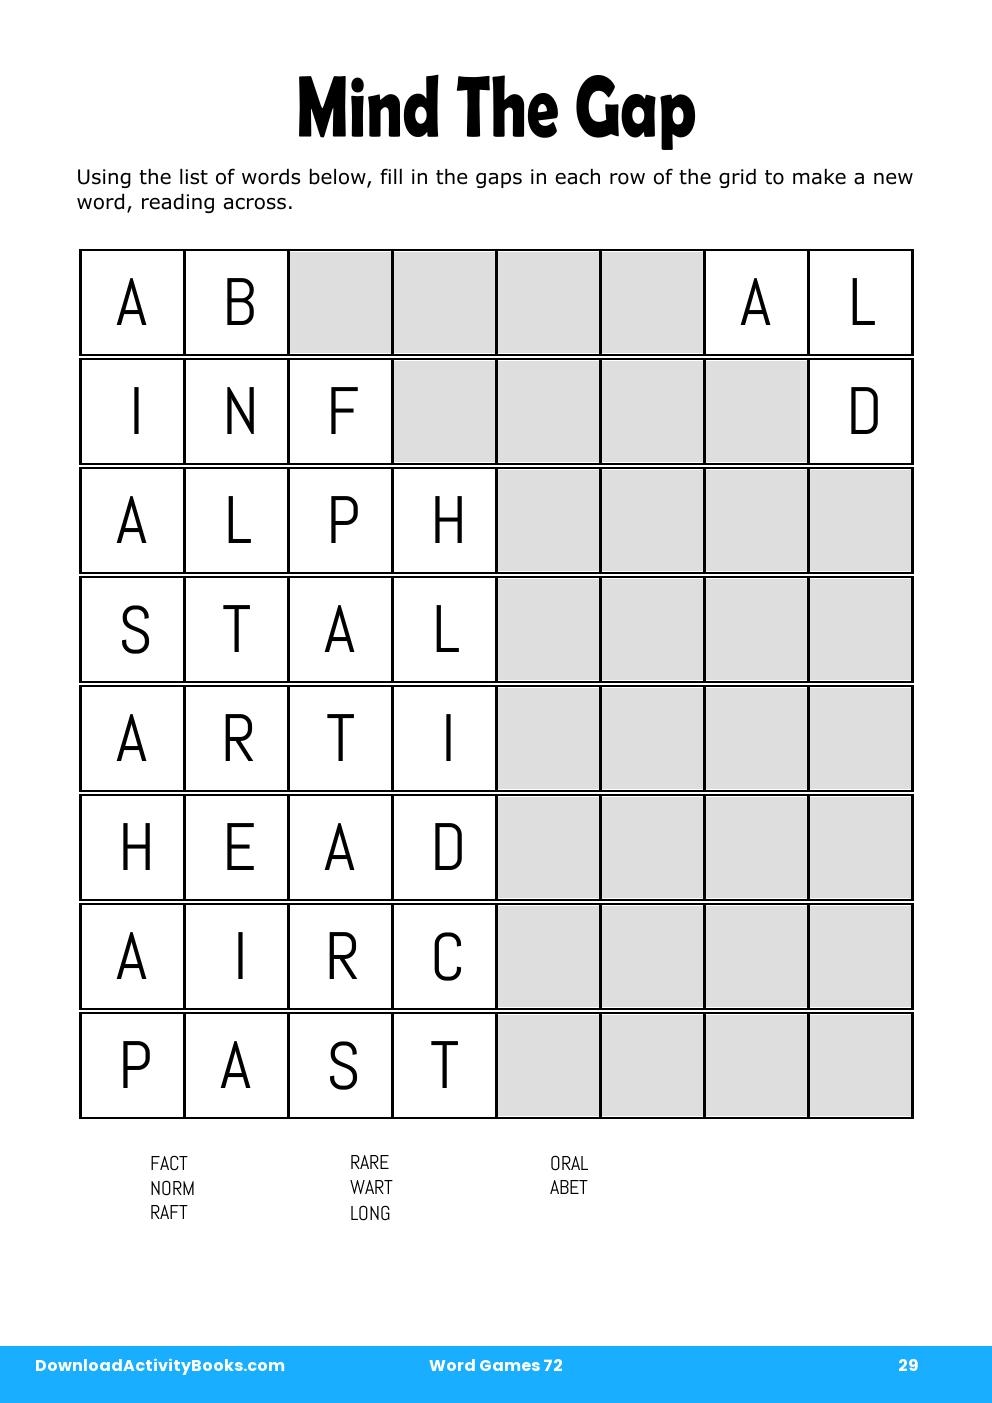 Mind The Gap in Word Games 72